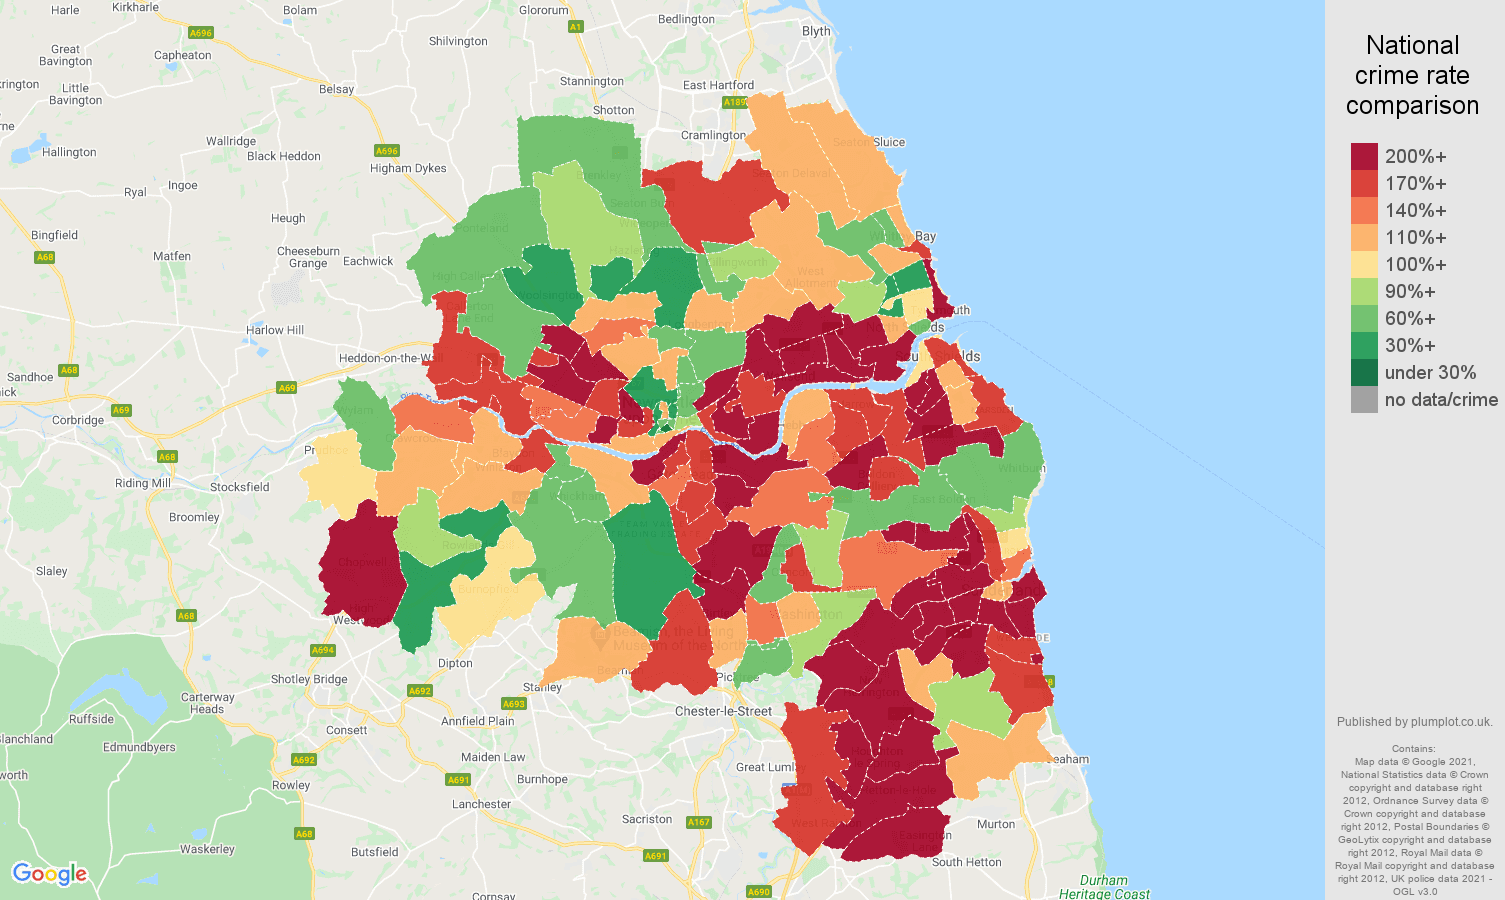 Tyne and Wear criminal damage and arson crime rate comparison map